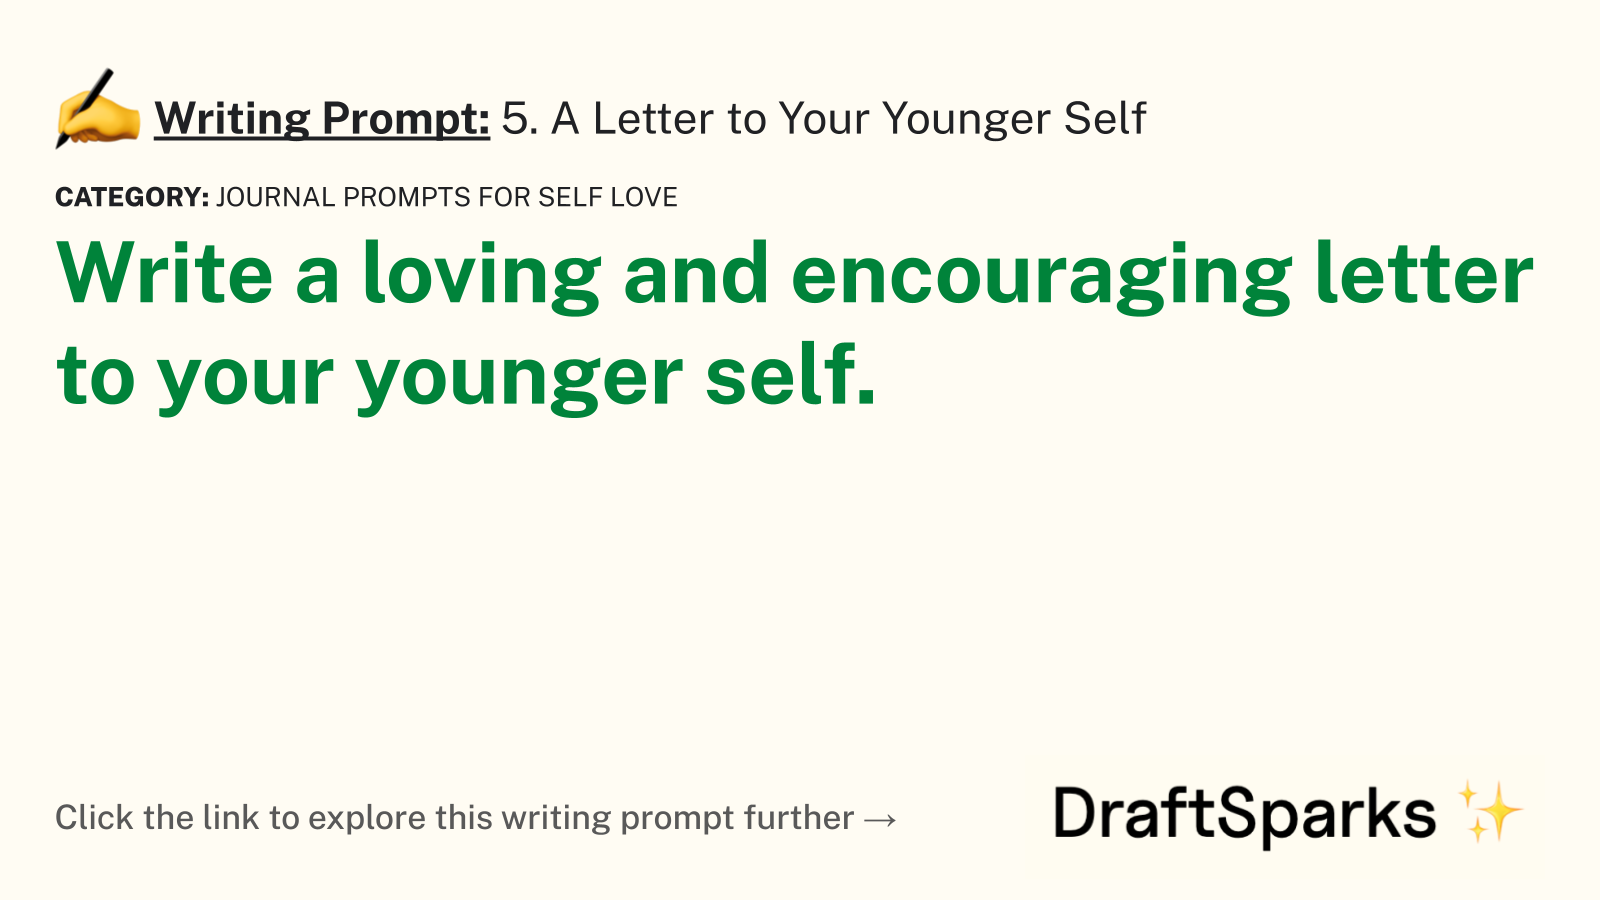 5. A Letter to Your Younger Self